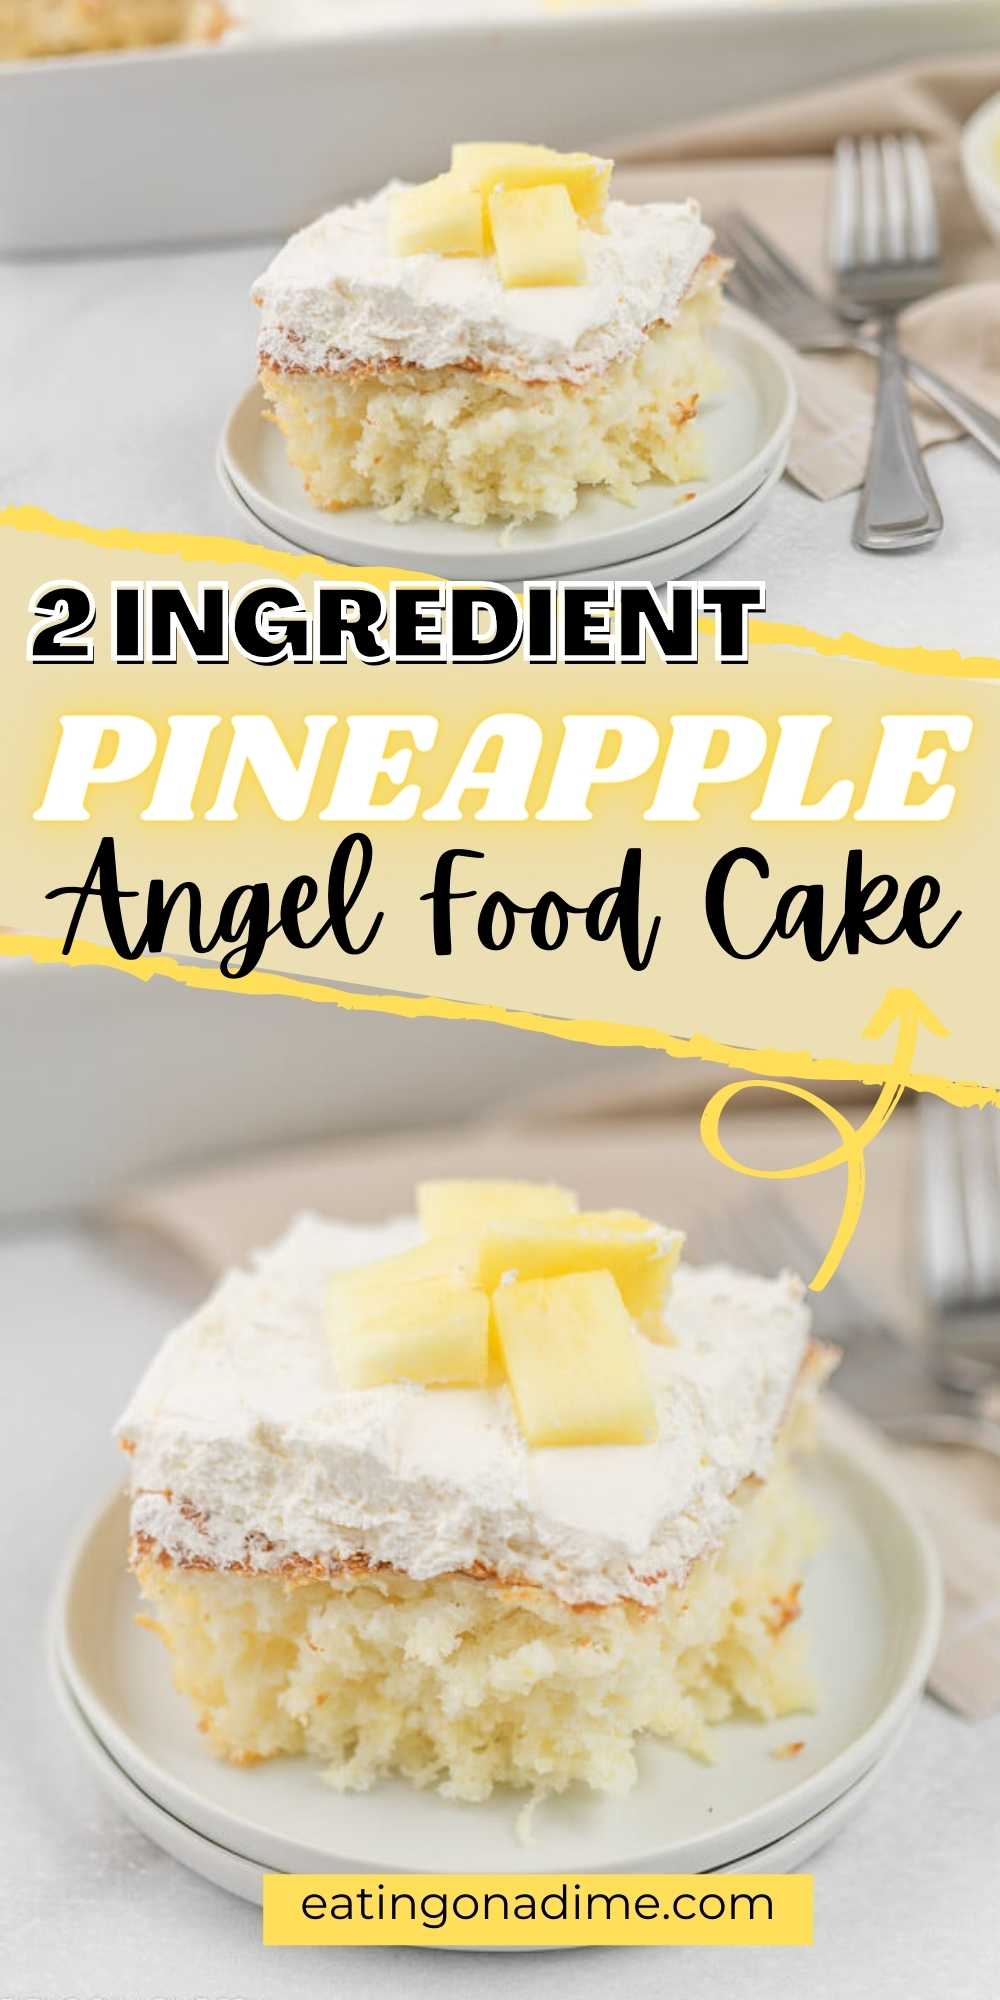 Make this easy pineapple angel food cake recipe today! With just 2 ingredients you will love this angel food cake with pineapple. This is a simple cake dessert recipe with pineapple that everyone will love! #eatingonadime #cakerecipes #pineapplerecipes 
